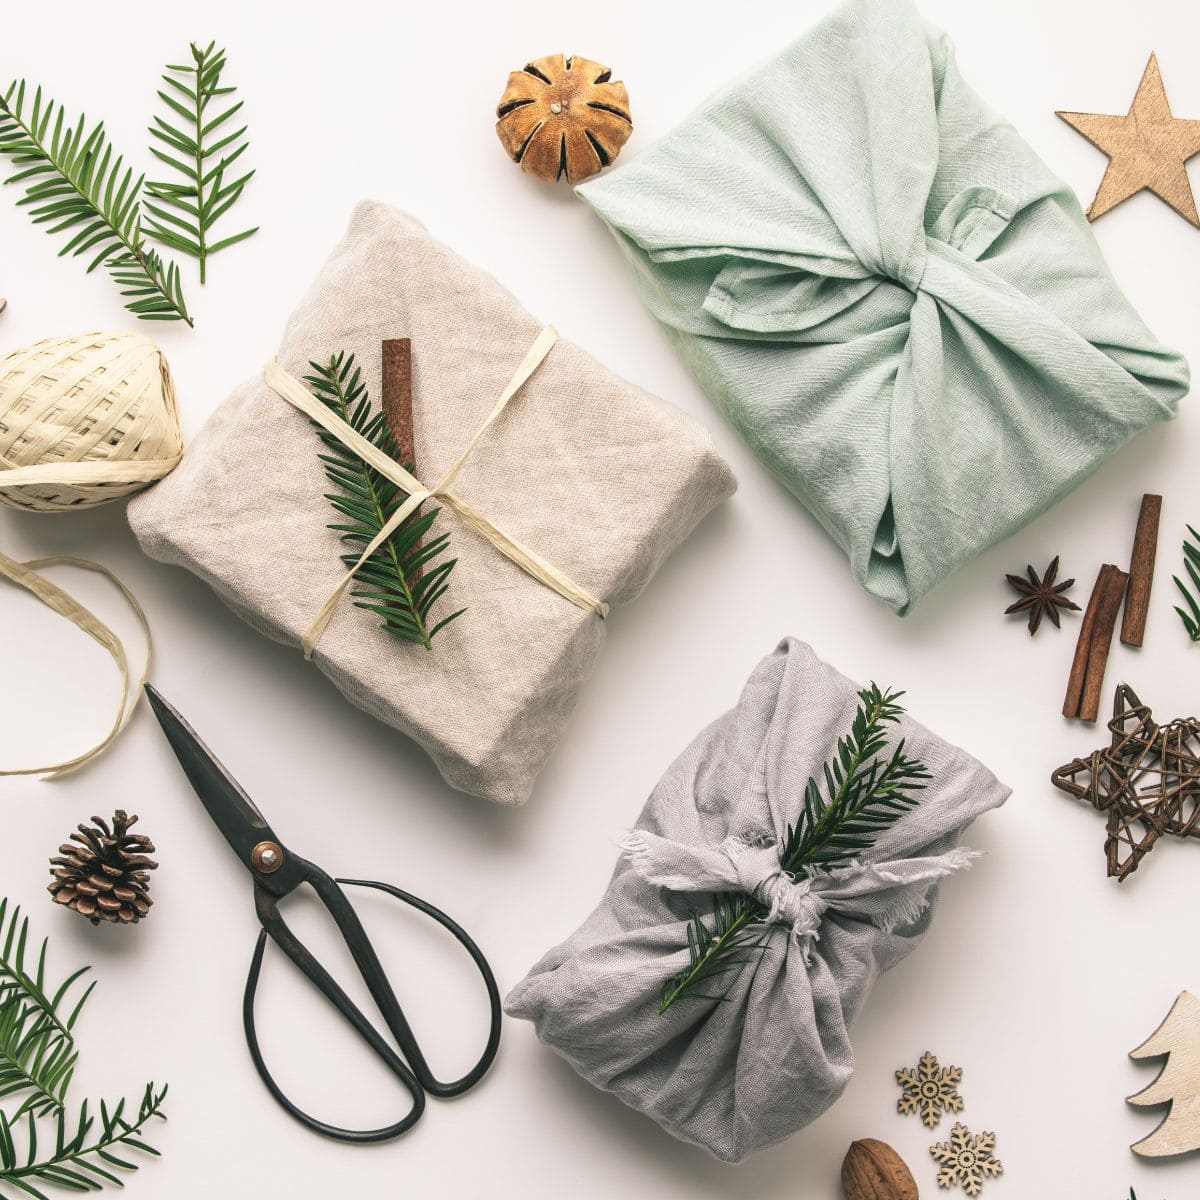 Sustainable Christmas gift ideas - Consumer NZ